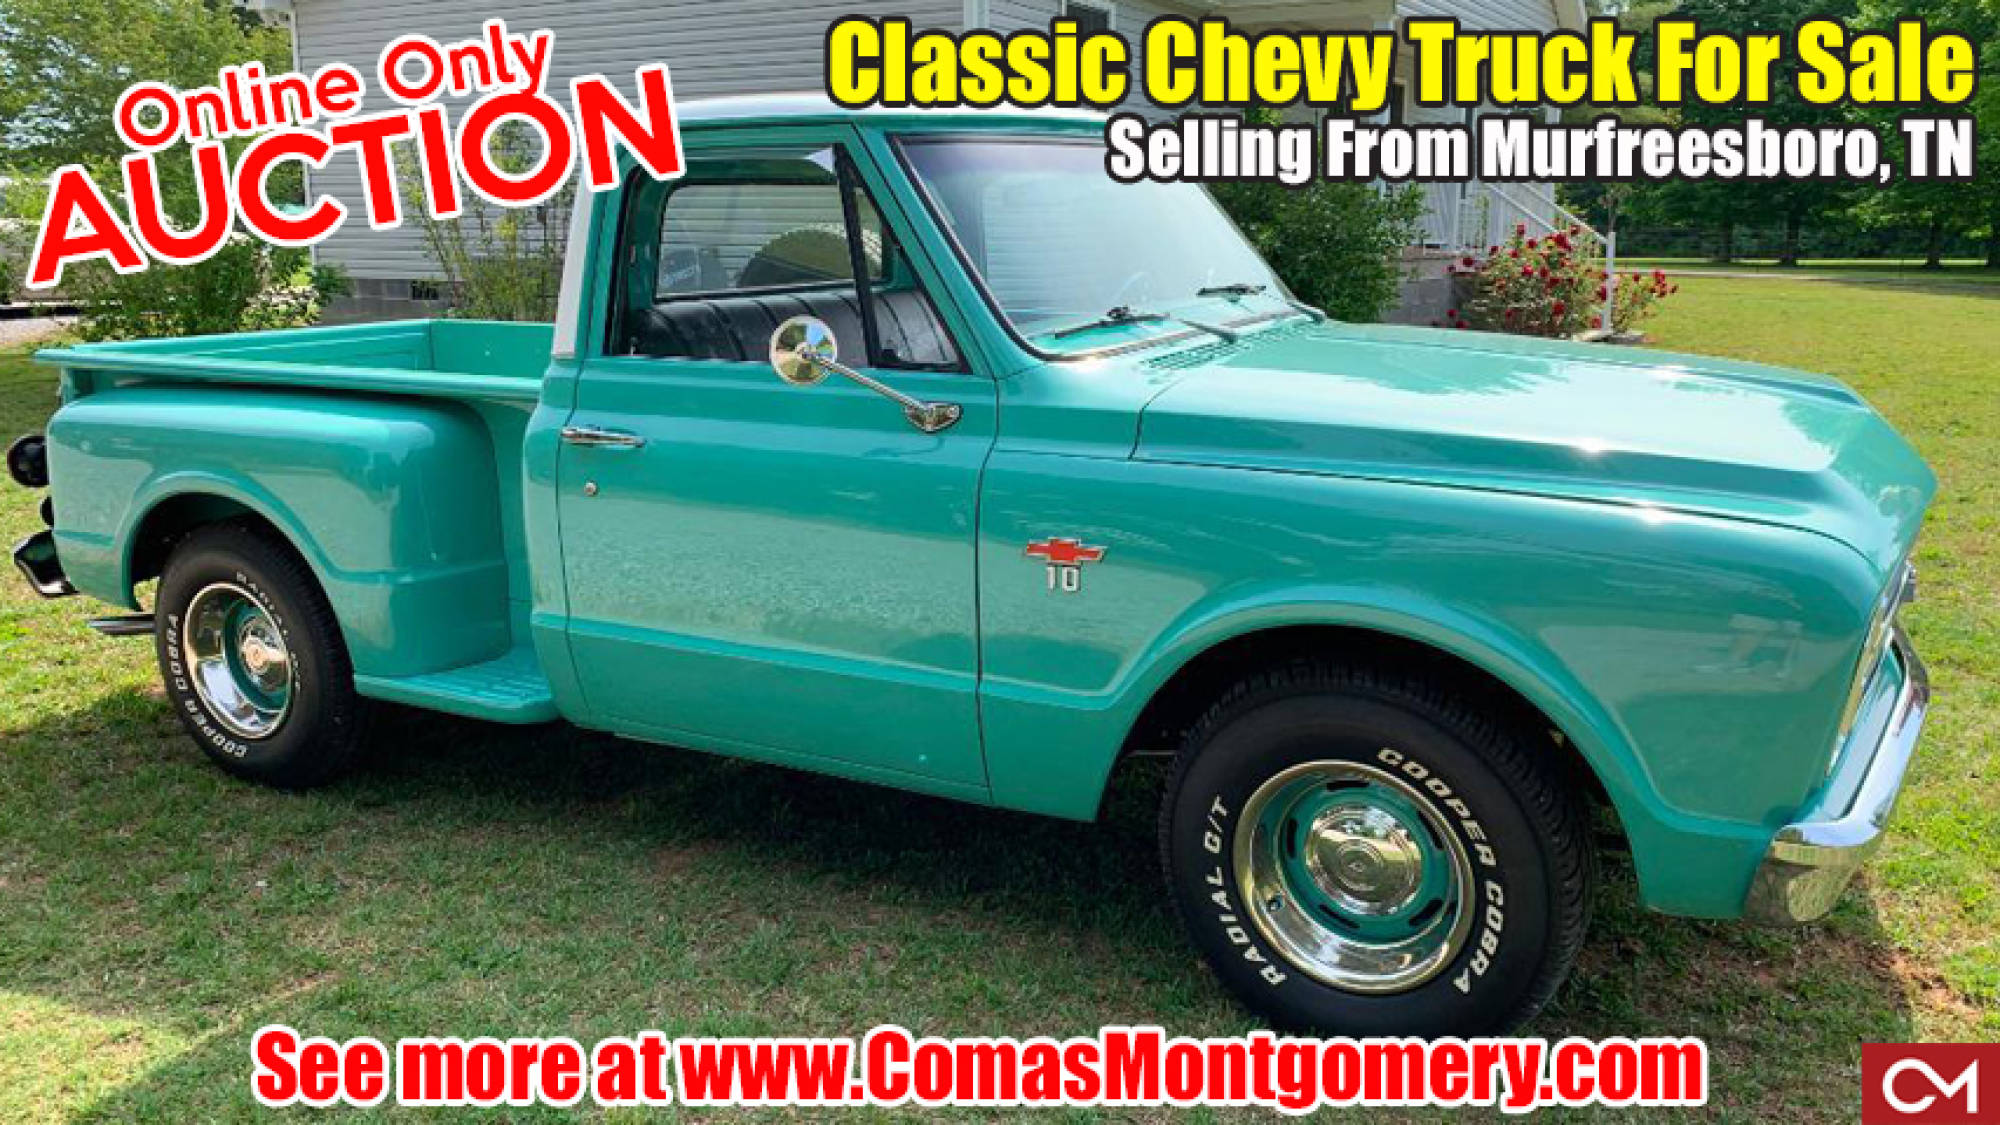 Chevy, Chevrolet, Truck, Automobile, Auto, Car, Auction, For Sale, Vehicle, Classic, Restored, 1967, C10, Murfreesboro, Tennessee, Comas, Montgomery